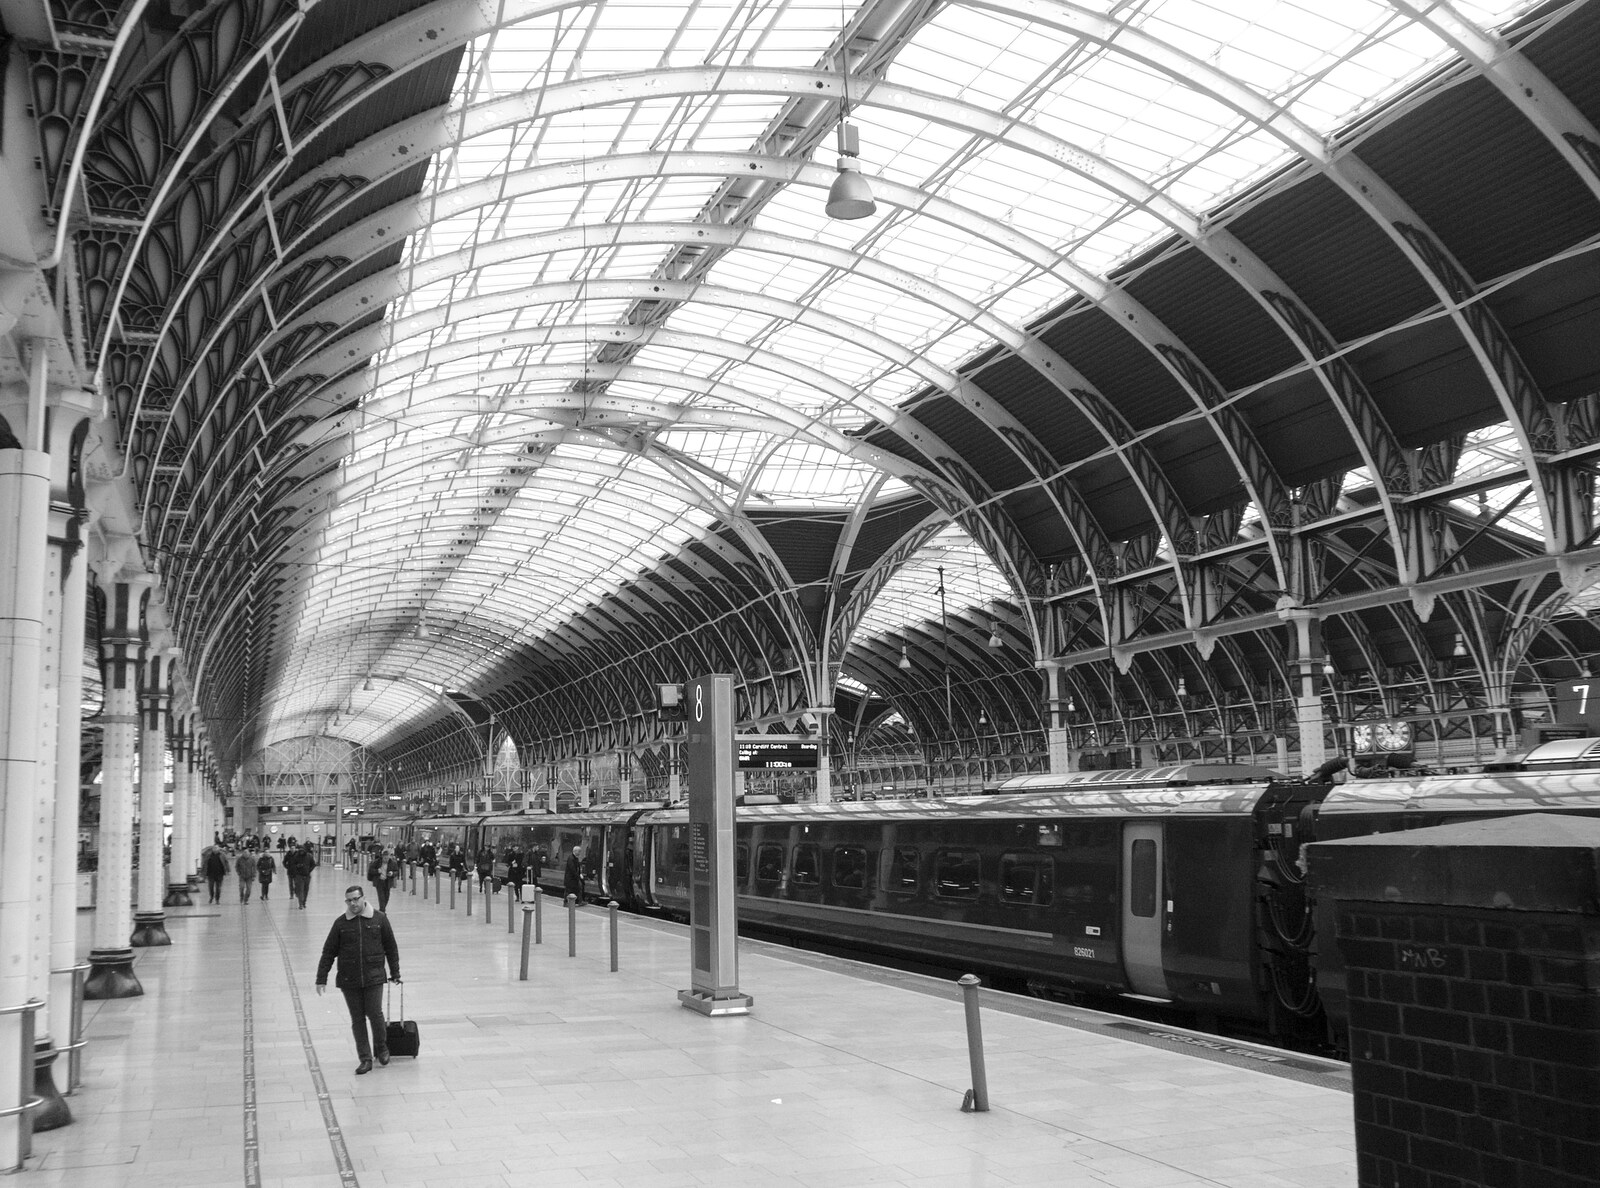 Paddington's ironwork is good in black and white from A Small Transport Miscellany, London - 7th January 2020